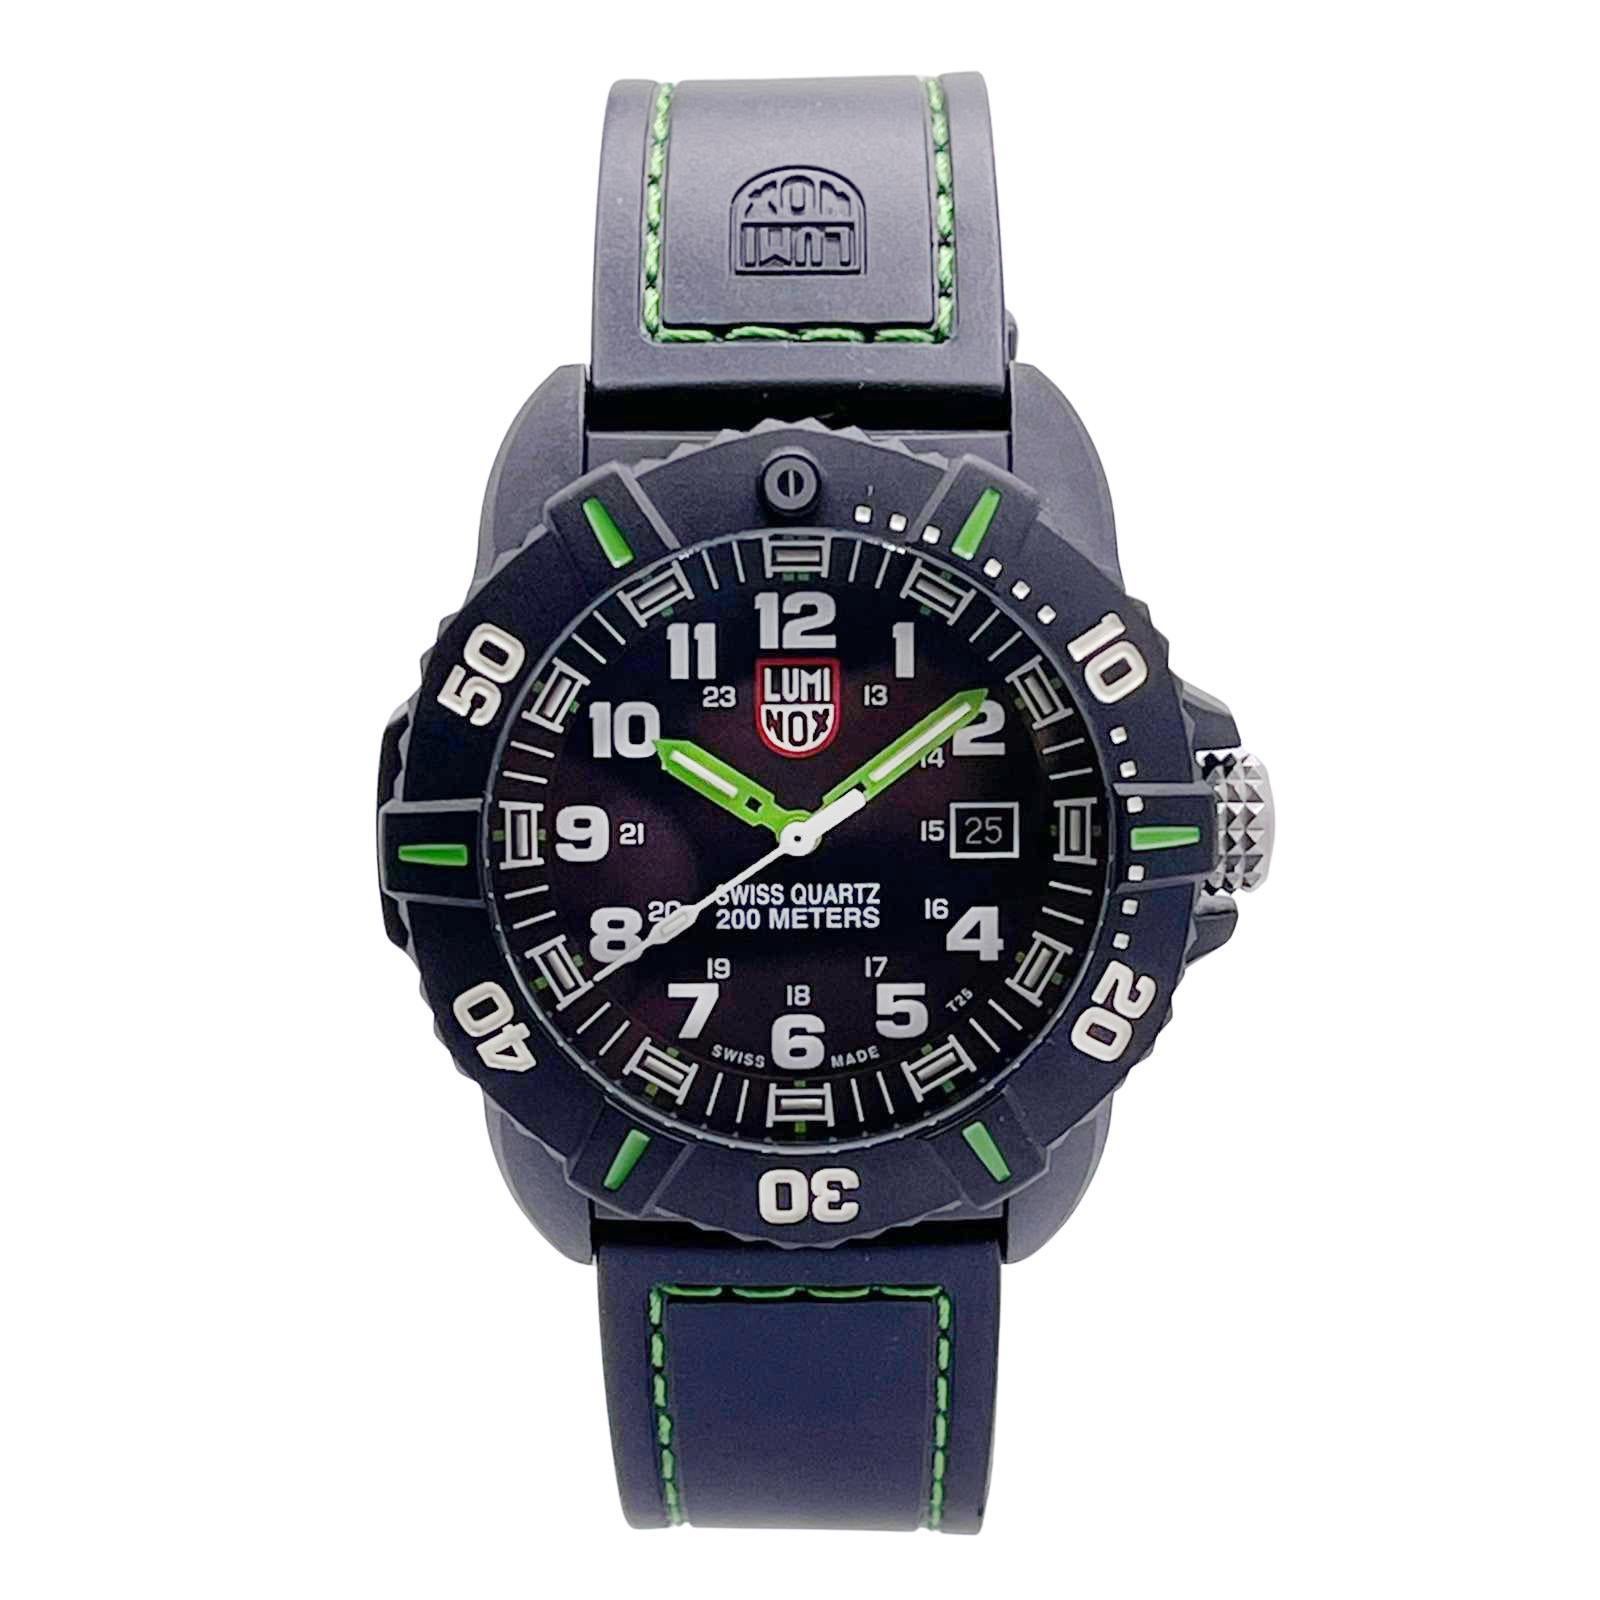 Display Model Luminox Coronado Men's Watch XS.3037. This Timepiece is powered by Quartz (battery) movement with features: Carbon Case and Black Rubber Strap. Unidirectional Rotating Black Carbon Bezel. Black Dial with Luminous Green Hands and white